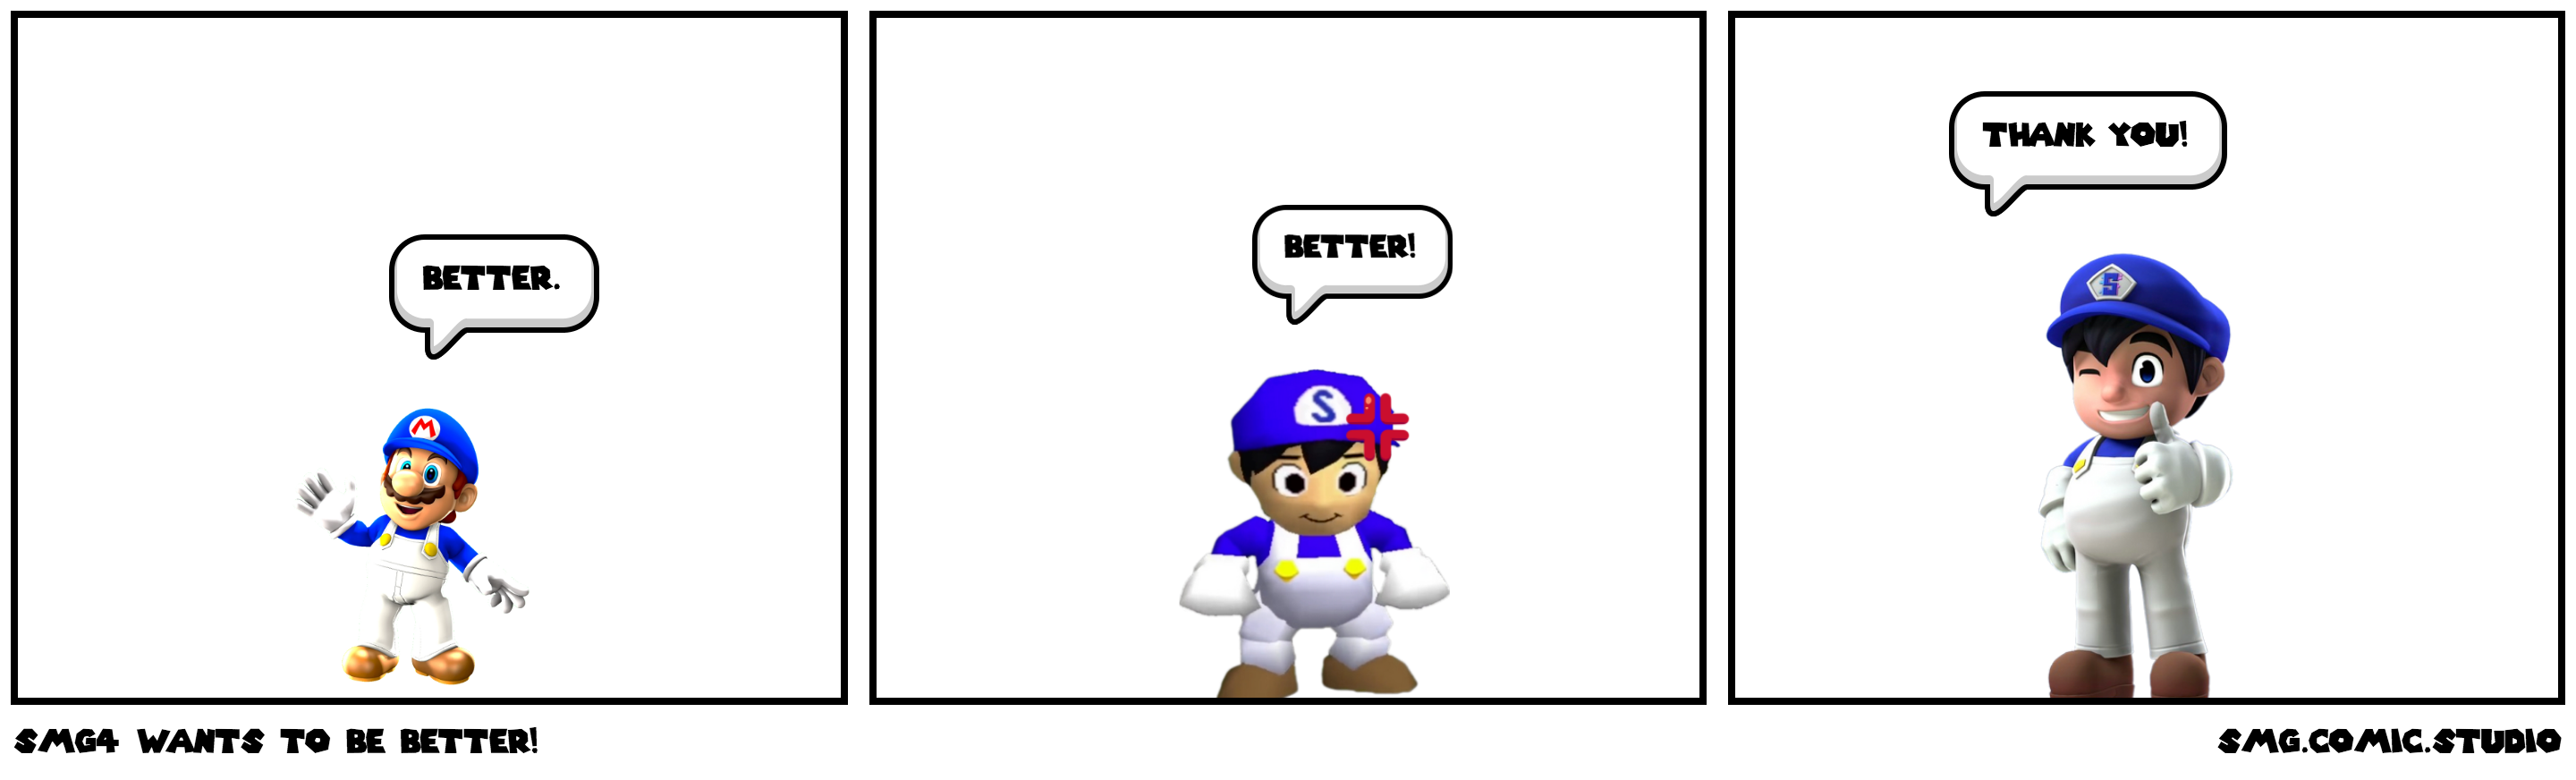 smg4 wants to be better!